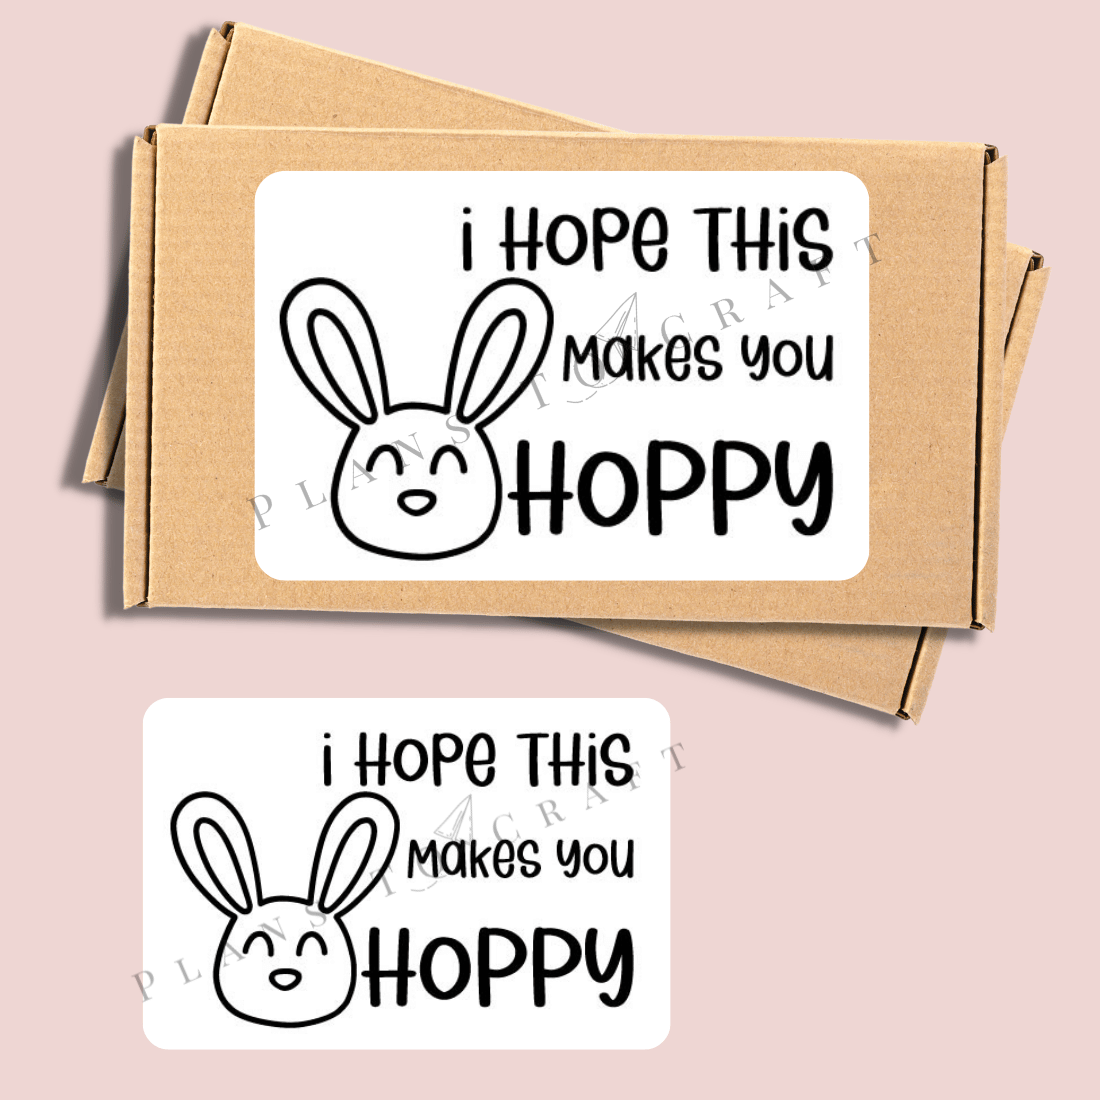 Pair of stickers that say i hope this makes you happy.